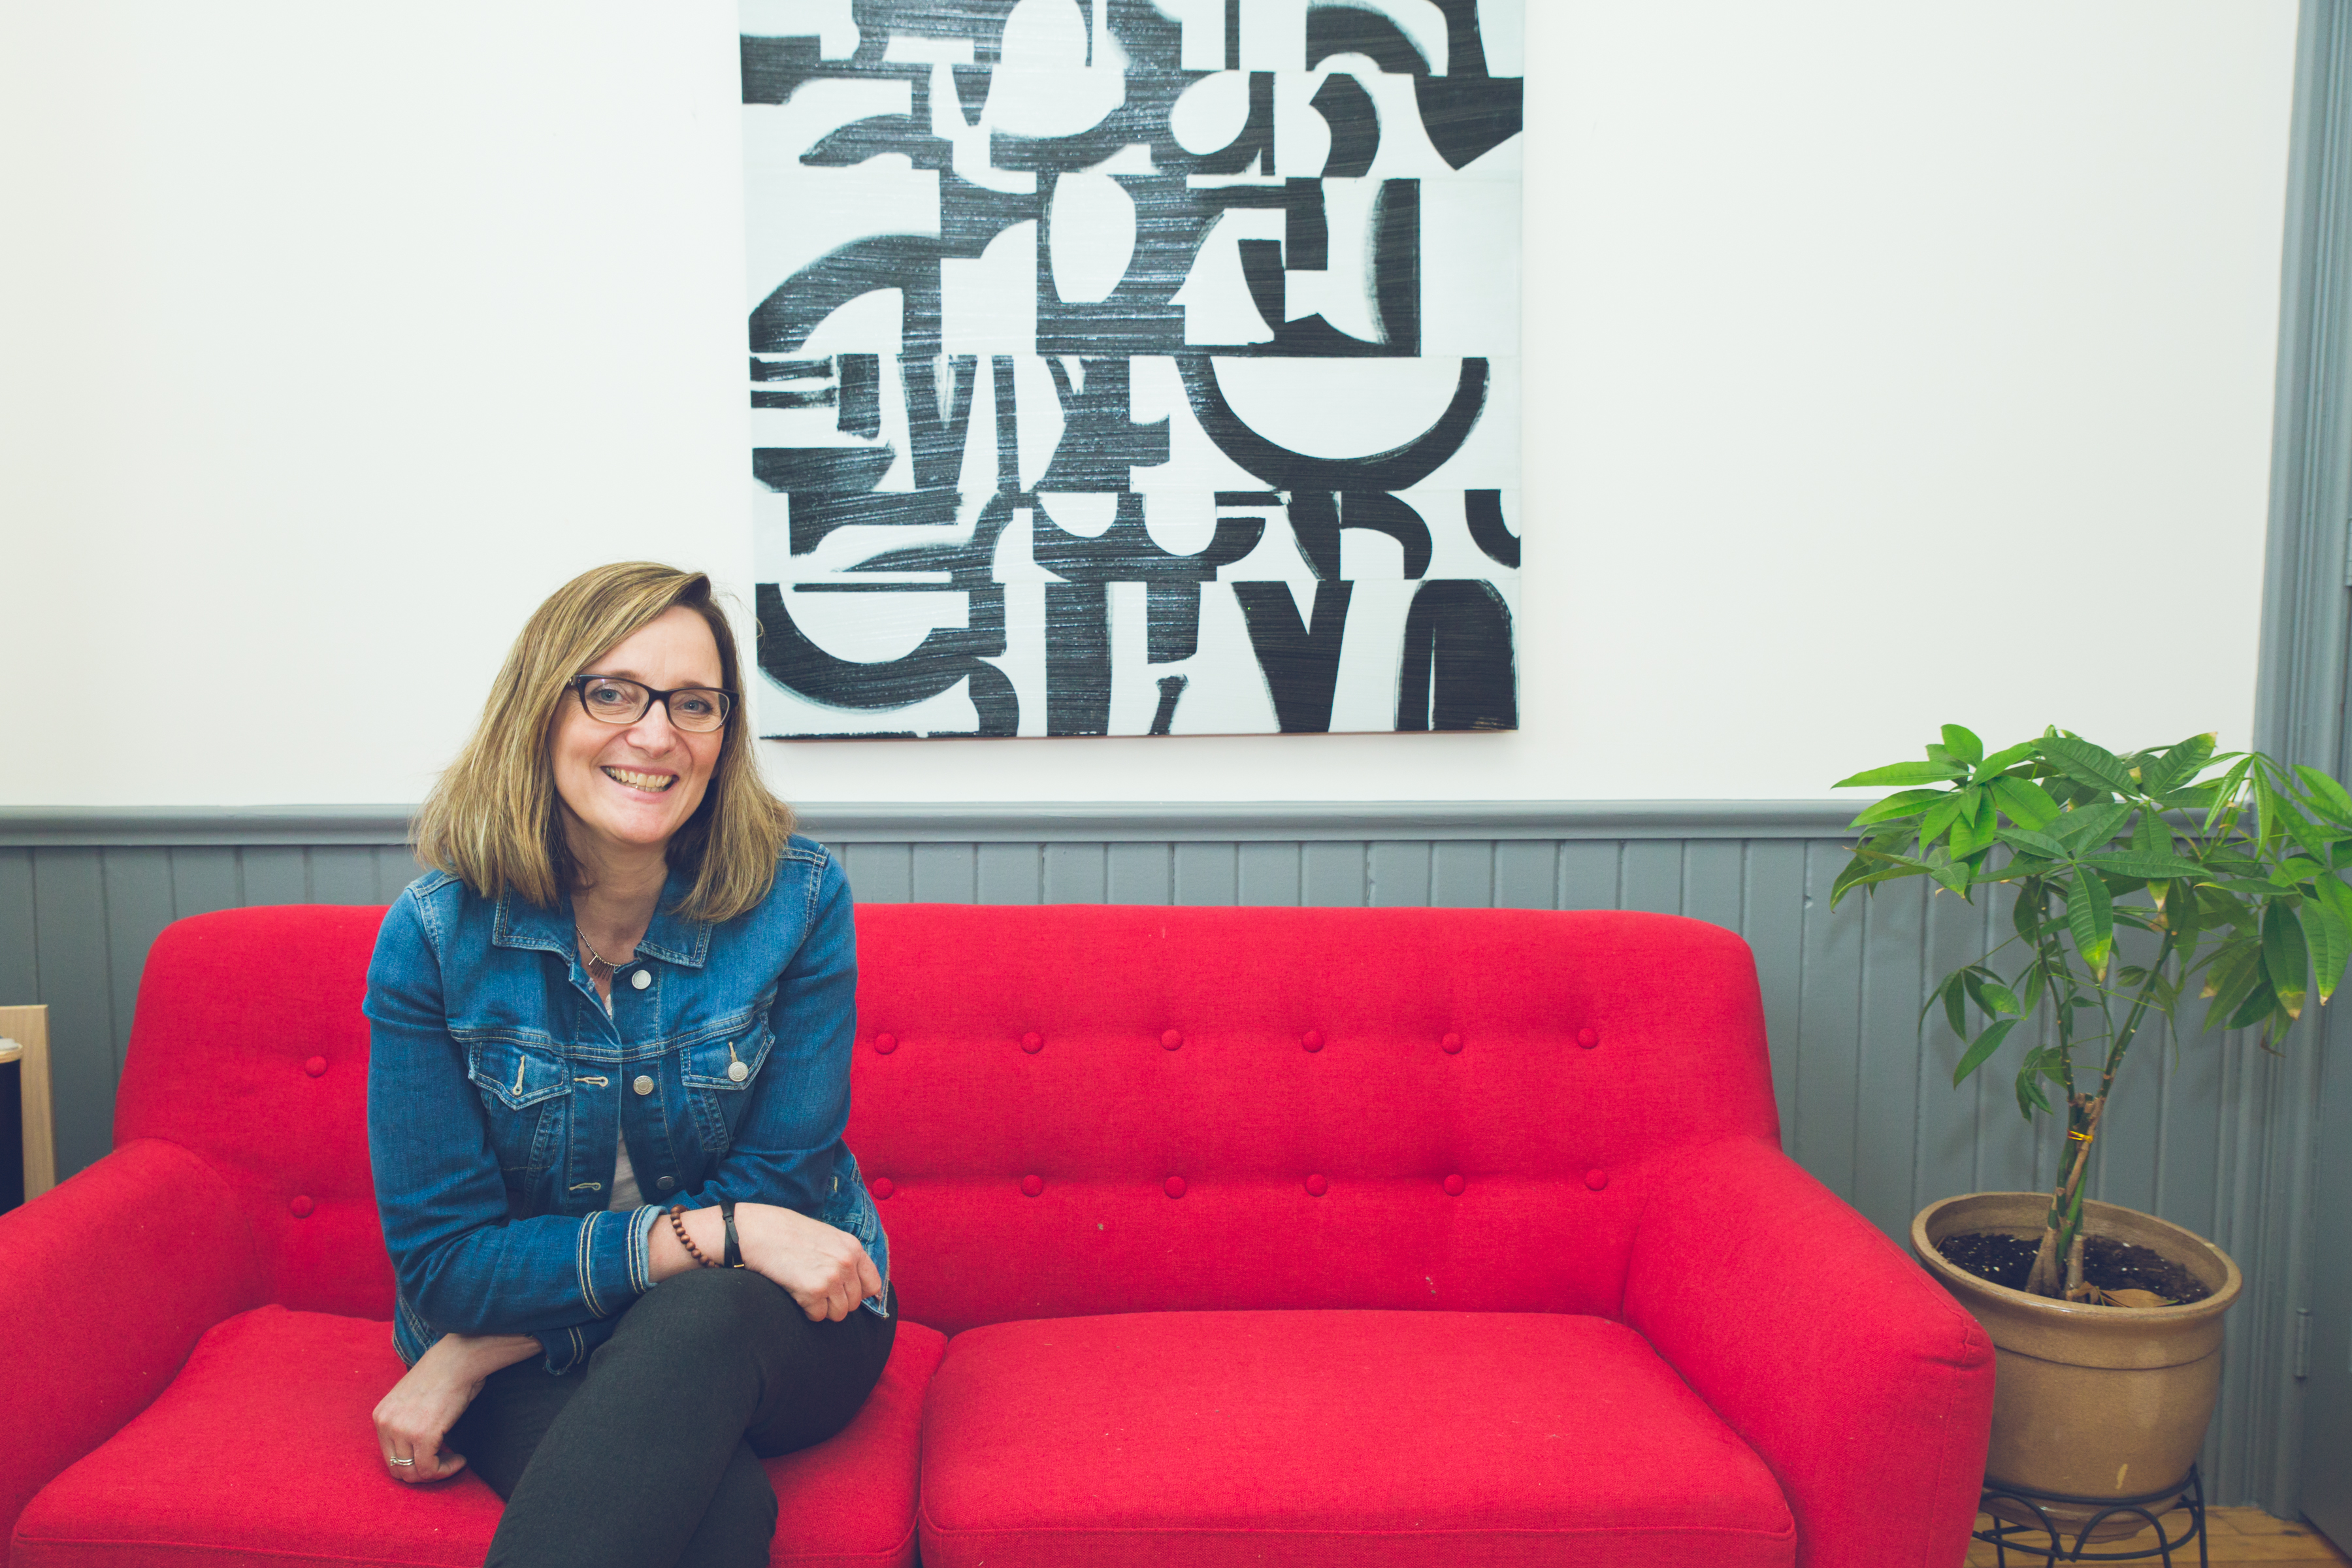 Charlotte coworking space owner of the Village Hive located in Markham Village